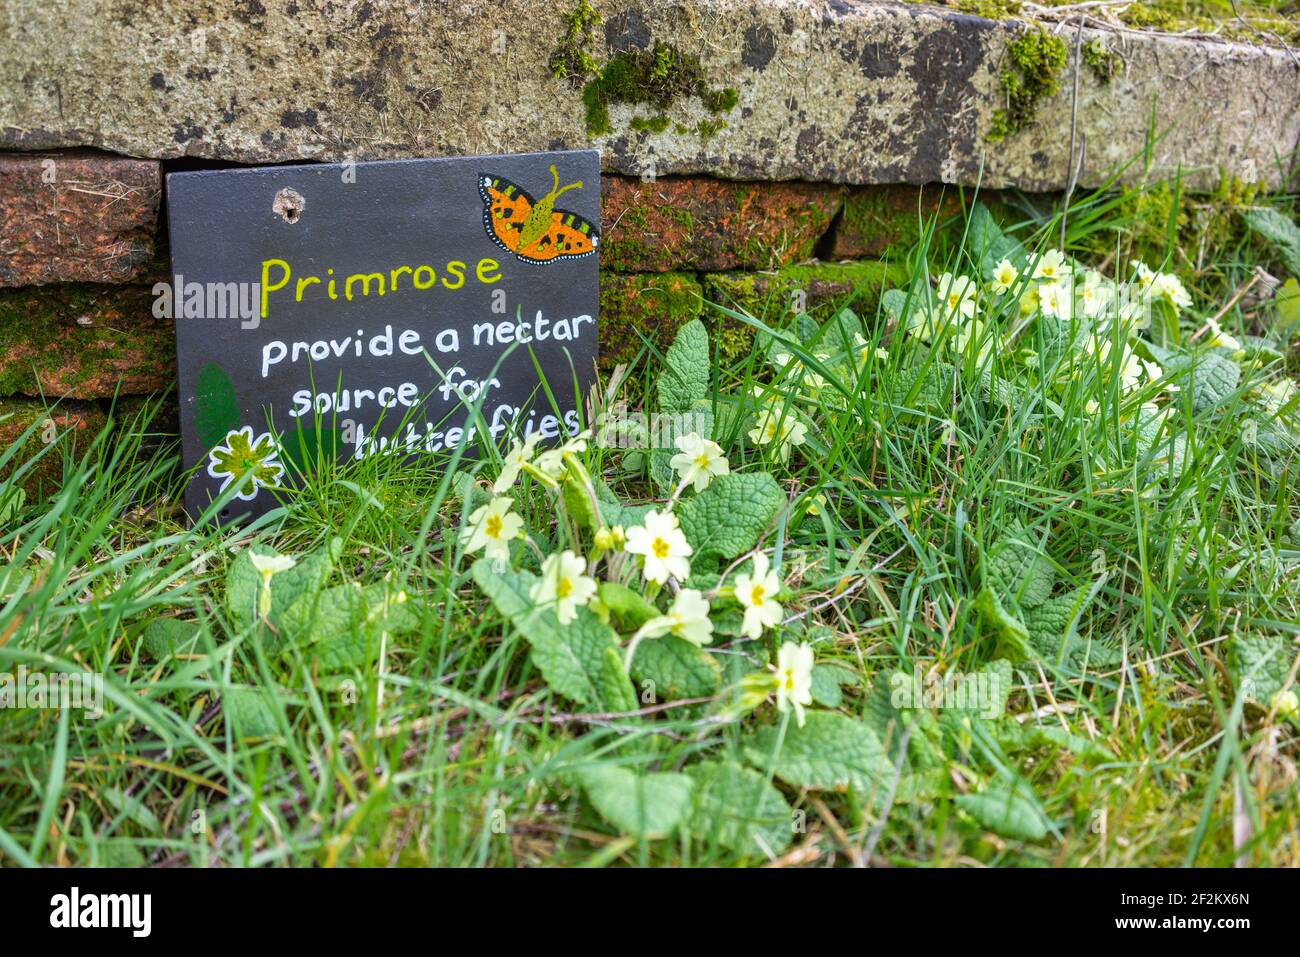 Sign reading 'Primrose provide a nectar source for butterflies' next to a cluster of yellow primrose flowers, nature conservation, in Southampton, UK Stock Photo